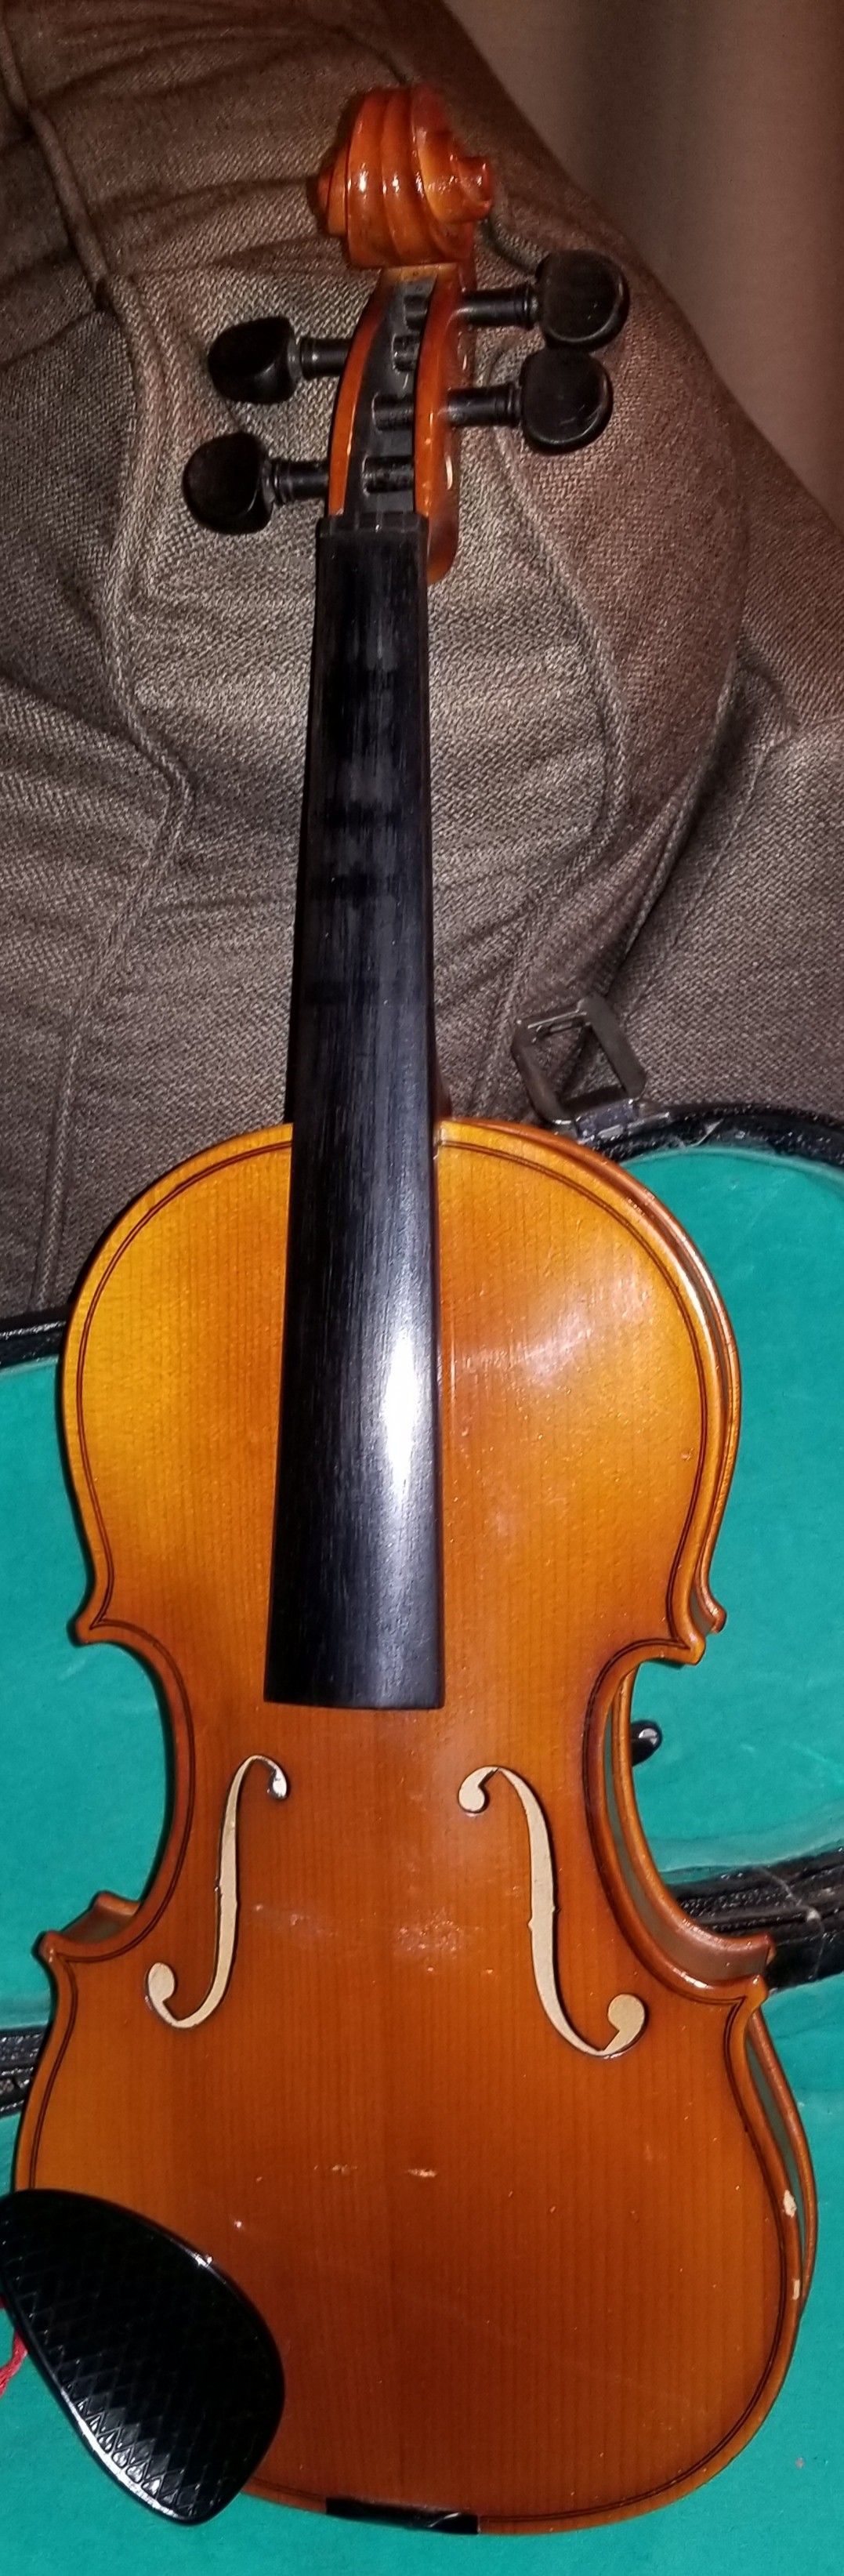 Becker String Instruments Violin with Case missing pieces, used for decor in music room